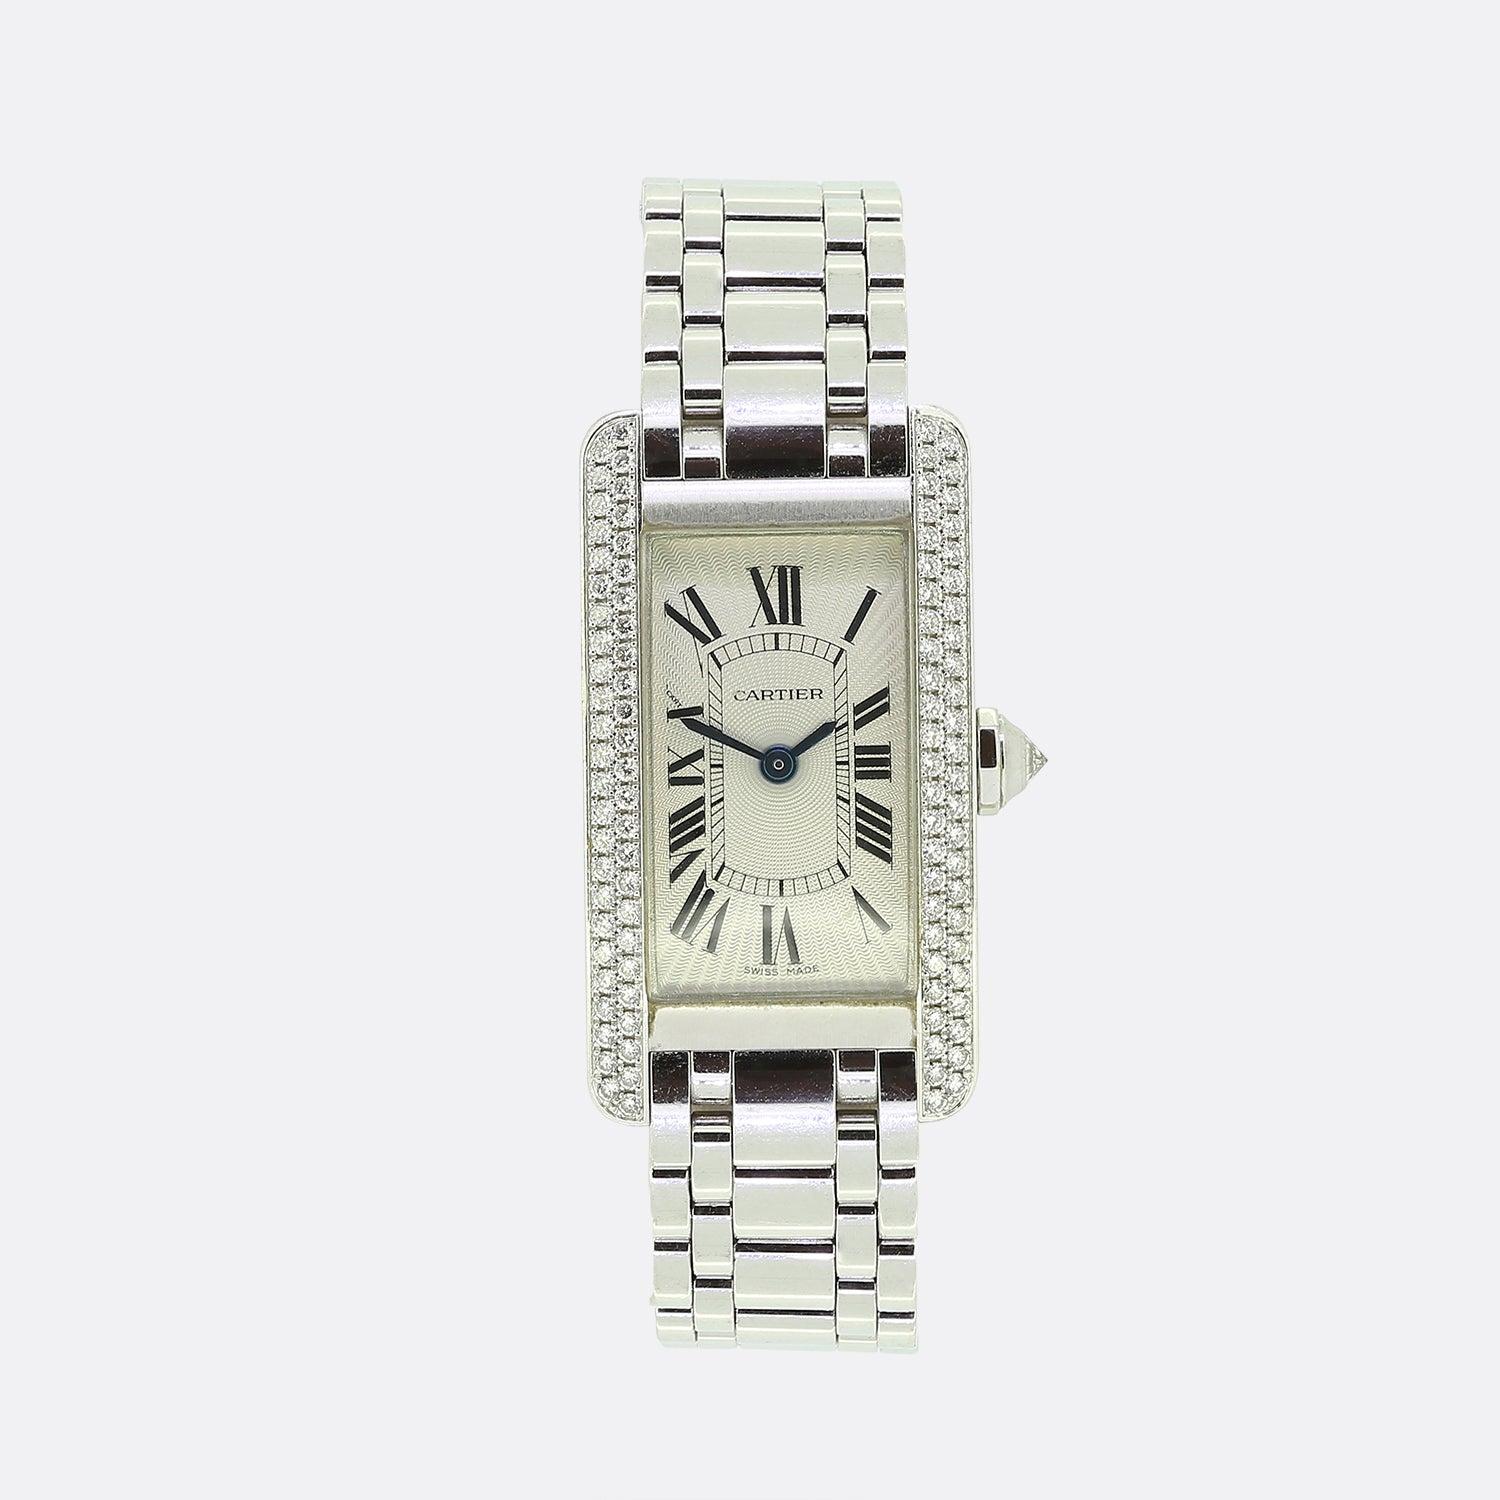 Here we have a beautiful ladies timepiece from the world renowned jewellery house of Cartier. The Cartier Tank has been an icon for over 100 years with its rectangular shaped case; in this respect crafted from 18ct white gold. The plain off white